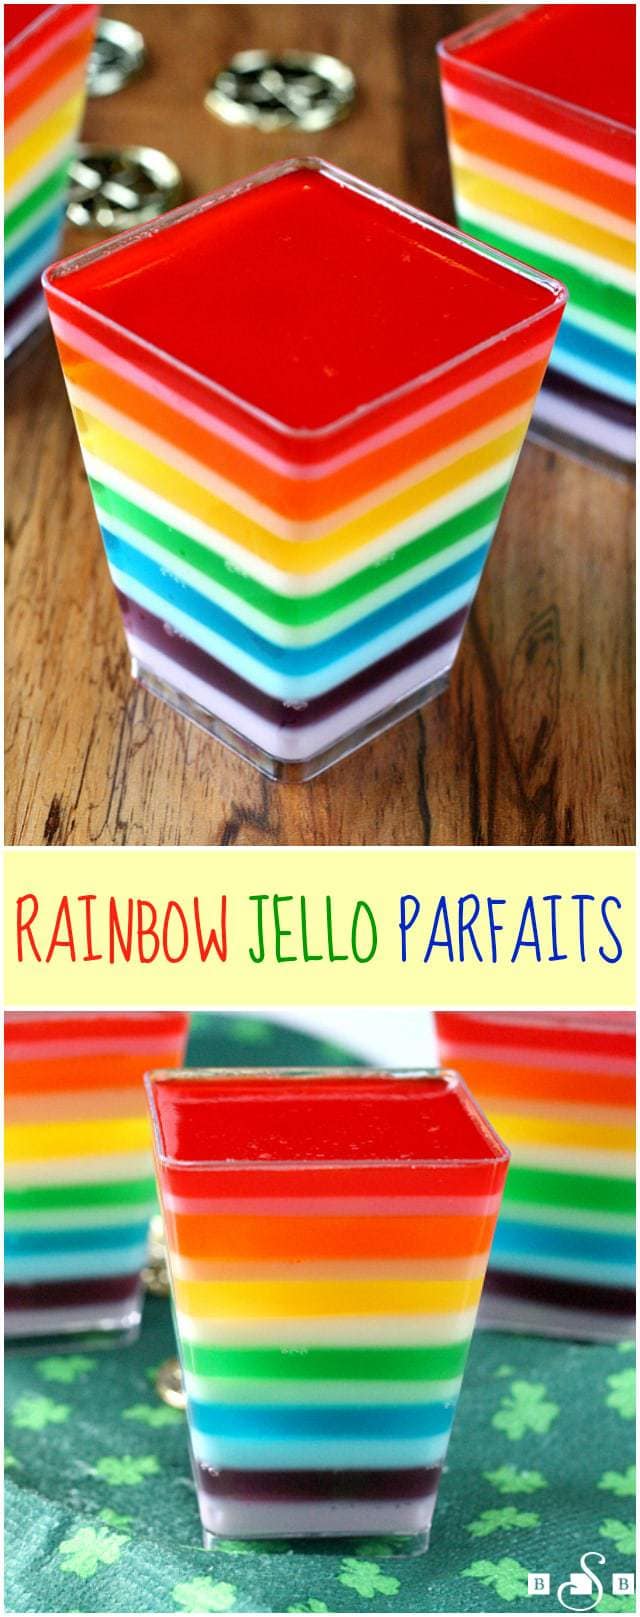 Rainbow Jello Parfaits are so festive and fun, especially for your kids on St. Patrick's Day! You only need two basic ingredients to make these...jello and yogurt! Jello dessert everyone loves!